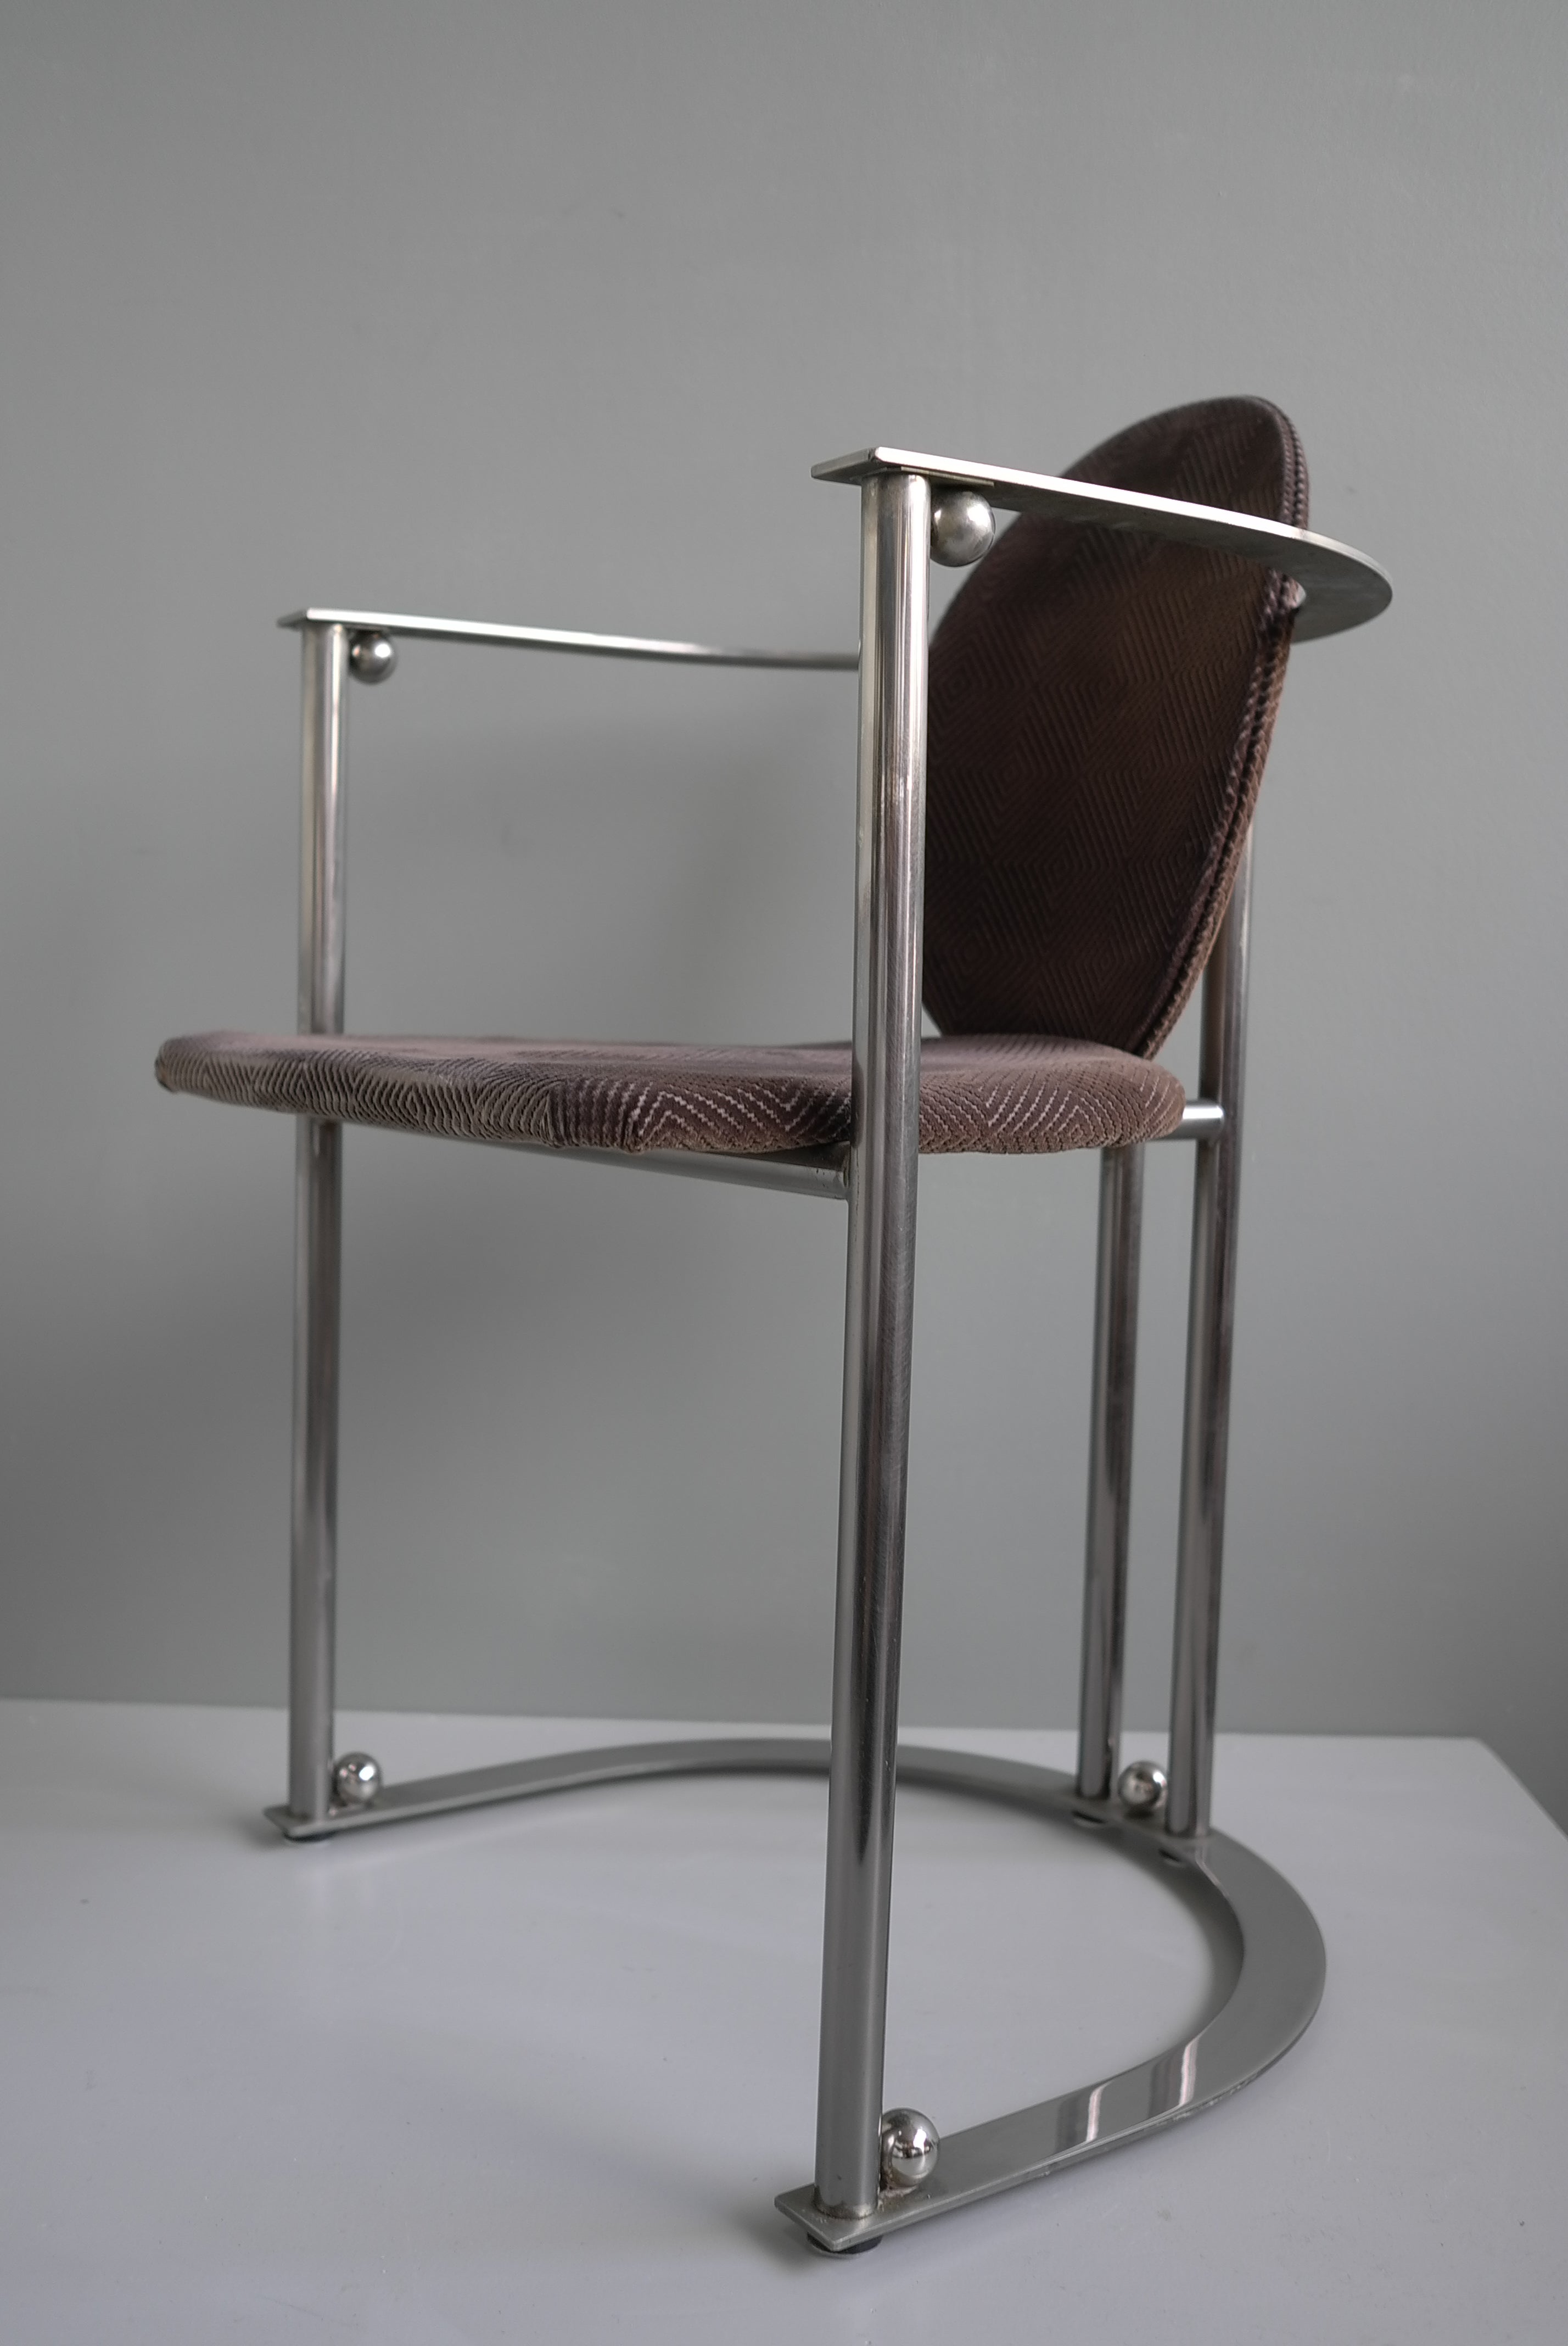 Set of six  style stainless steel Belgo Chrom 1970s deco dining chairs. Very well made heavy pieces with beautiful details. We kept the original fabric but they are in need of new upholstery. 

Each chair is: 80cm heightx54cm widthx45cm deep